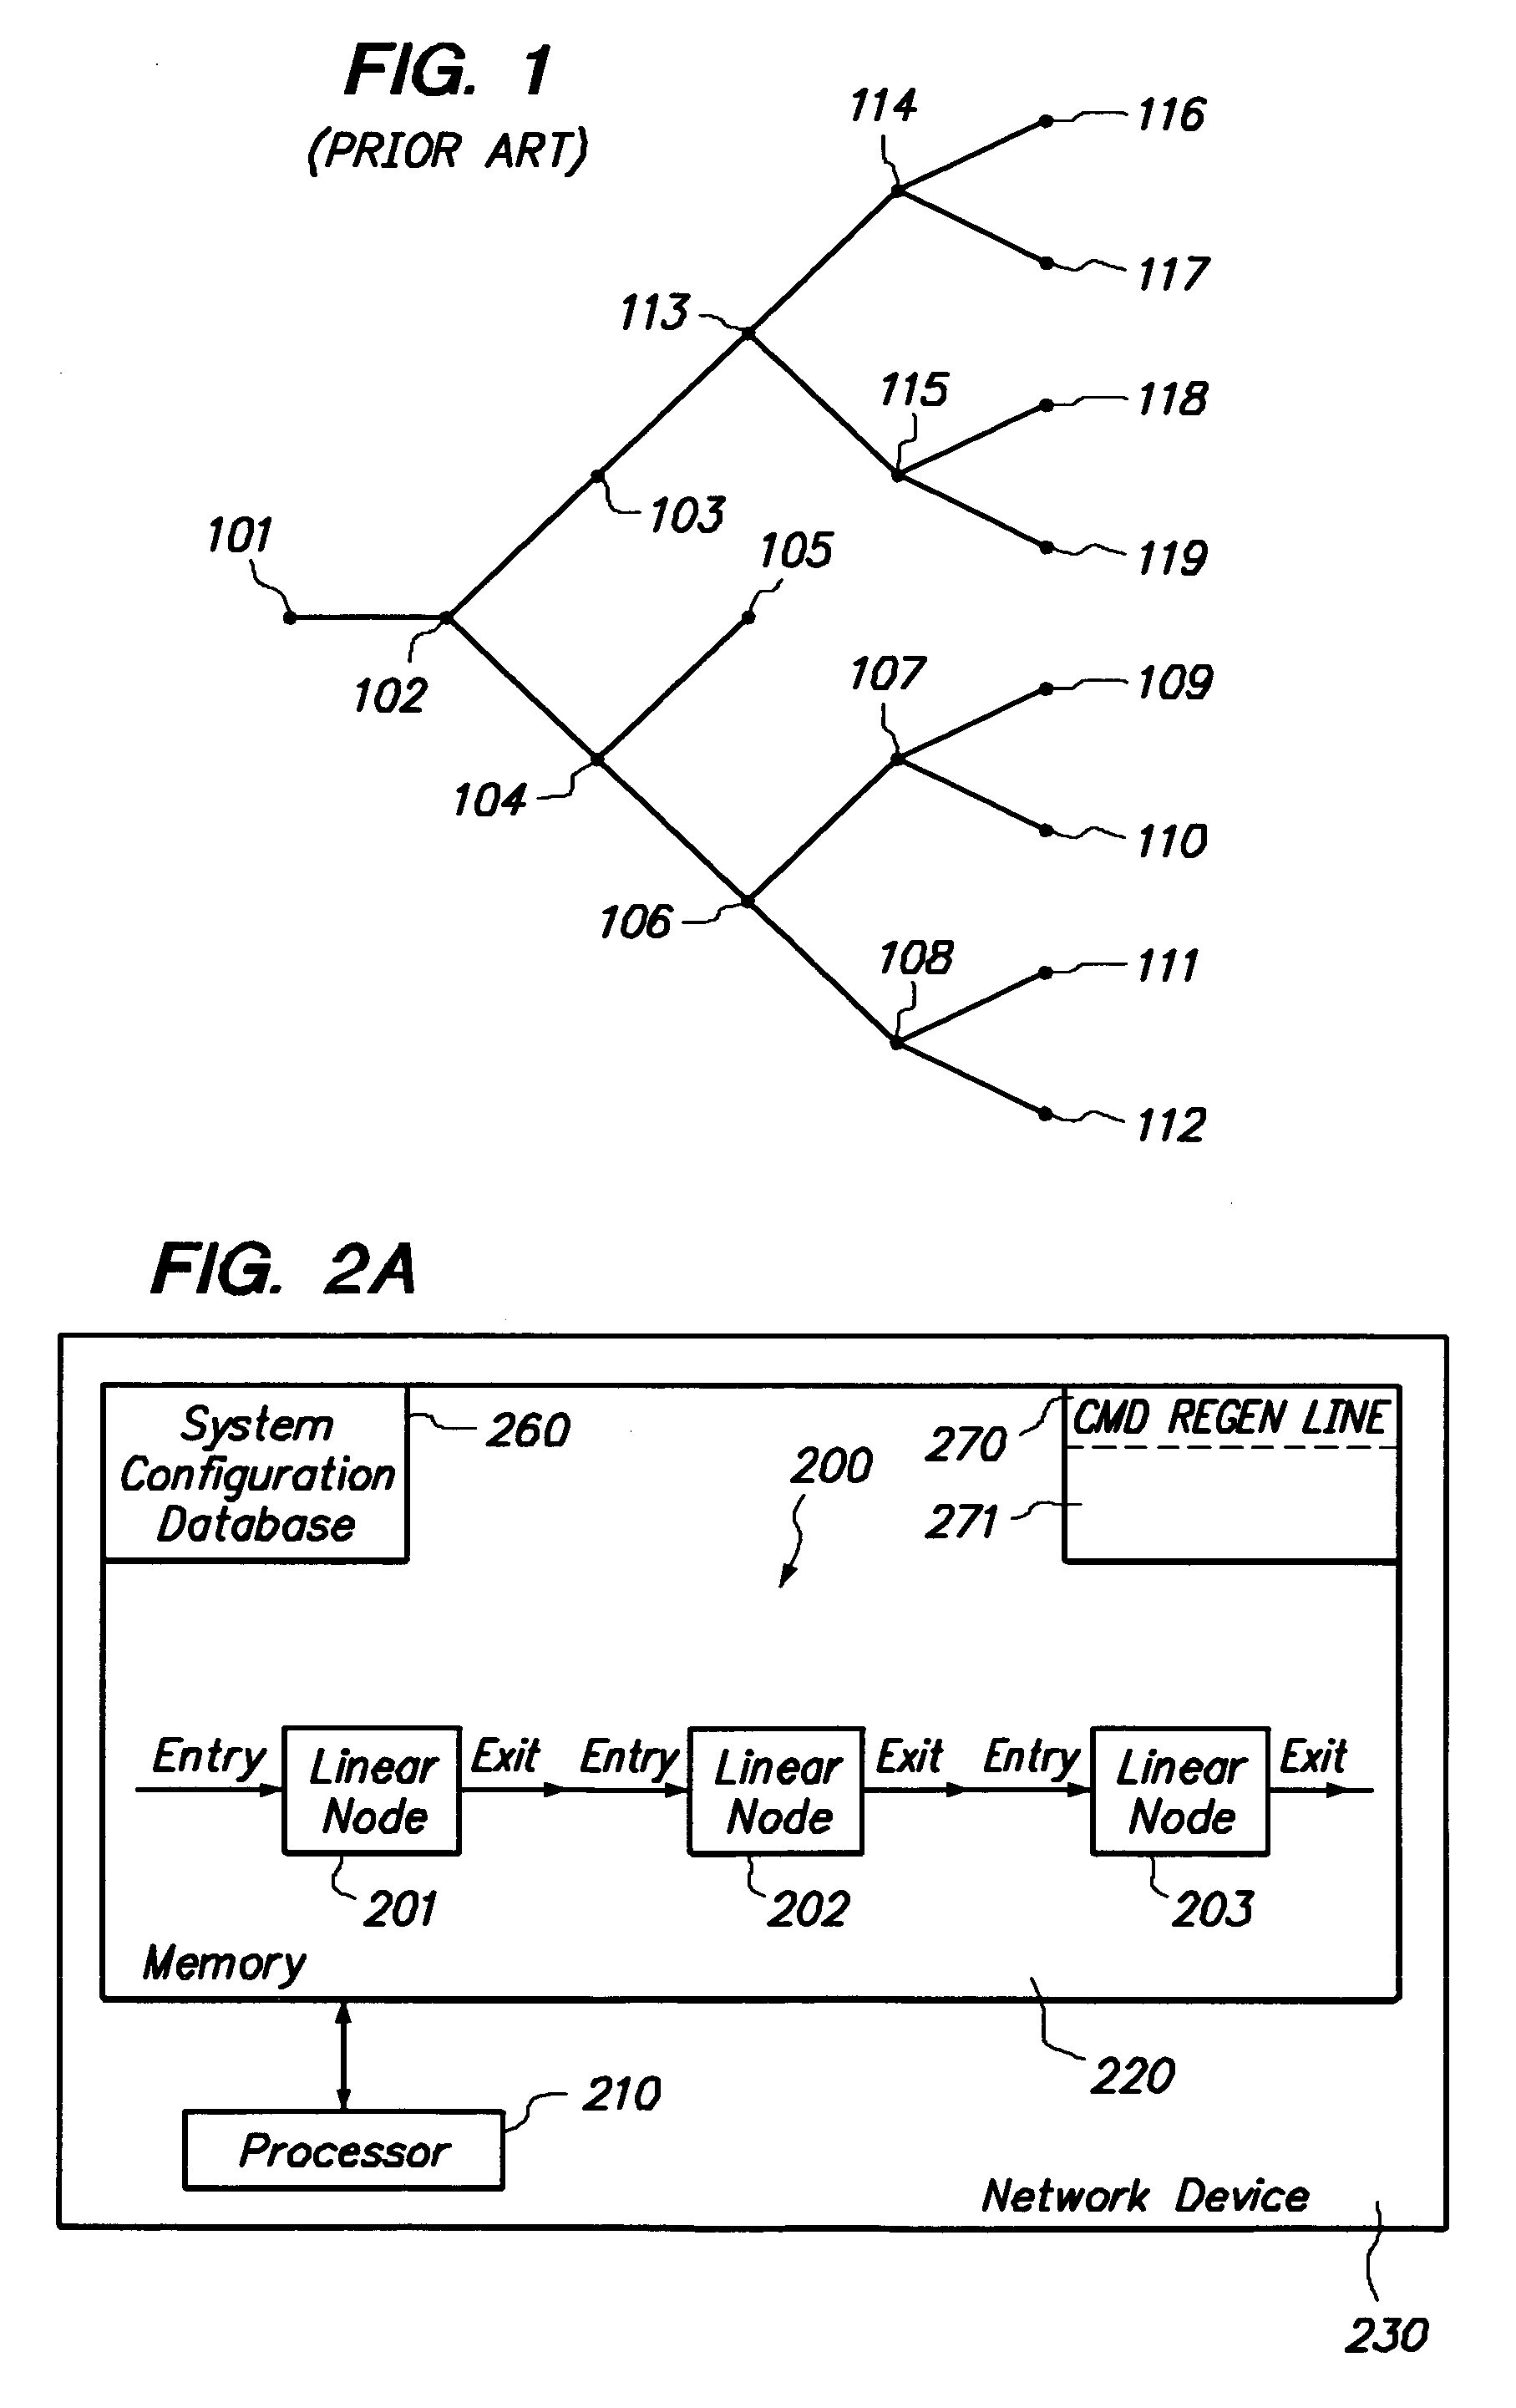 Method of parsing commands using linear tree representation